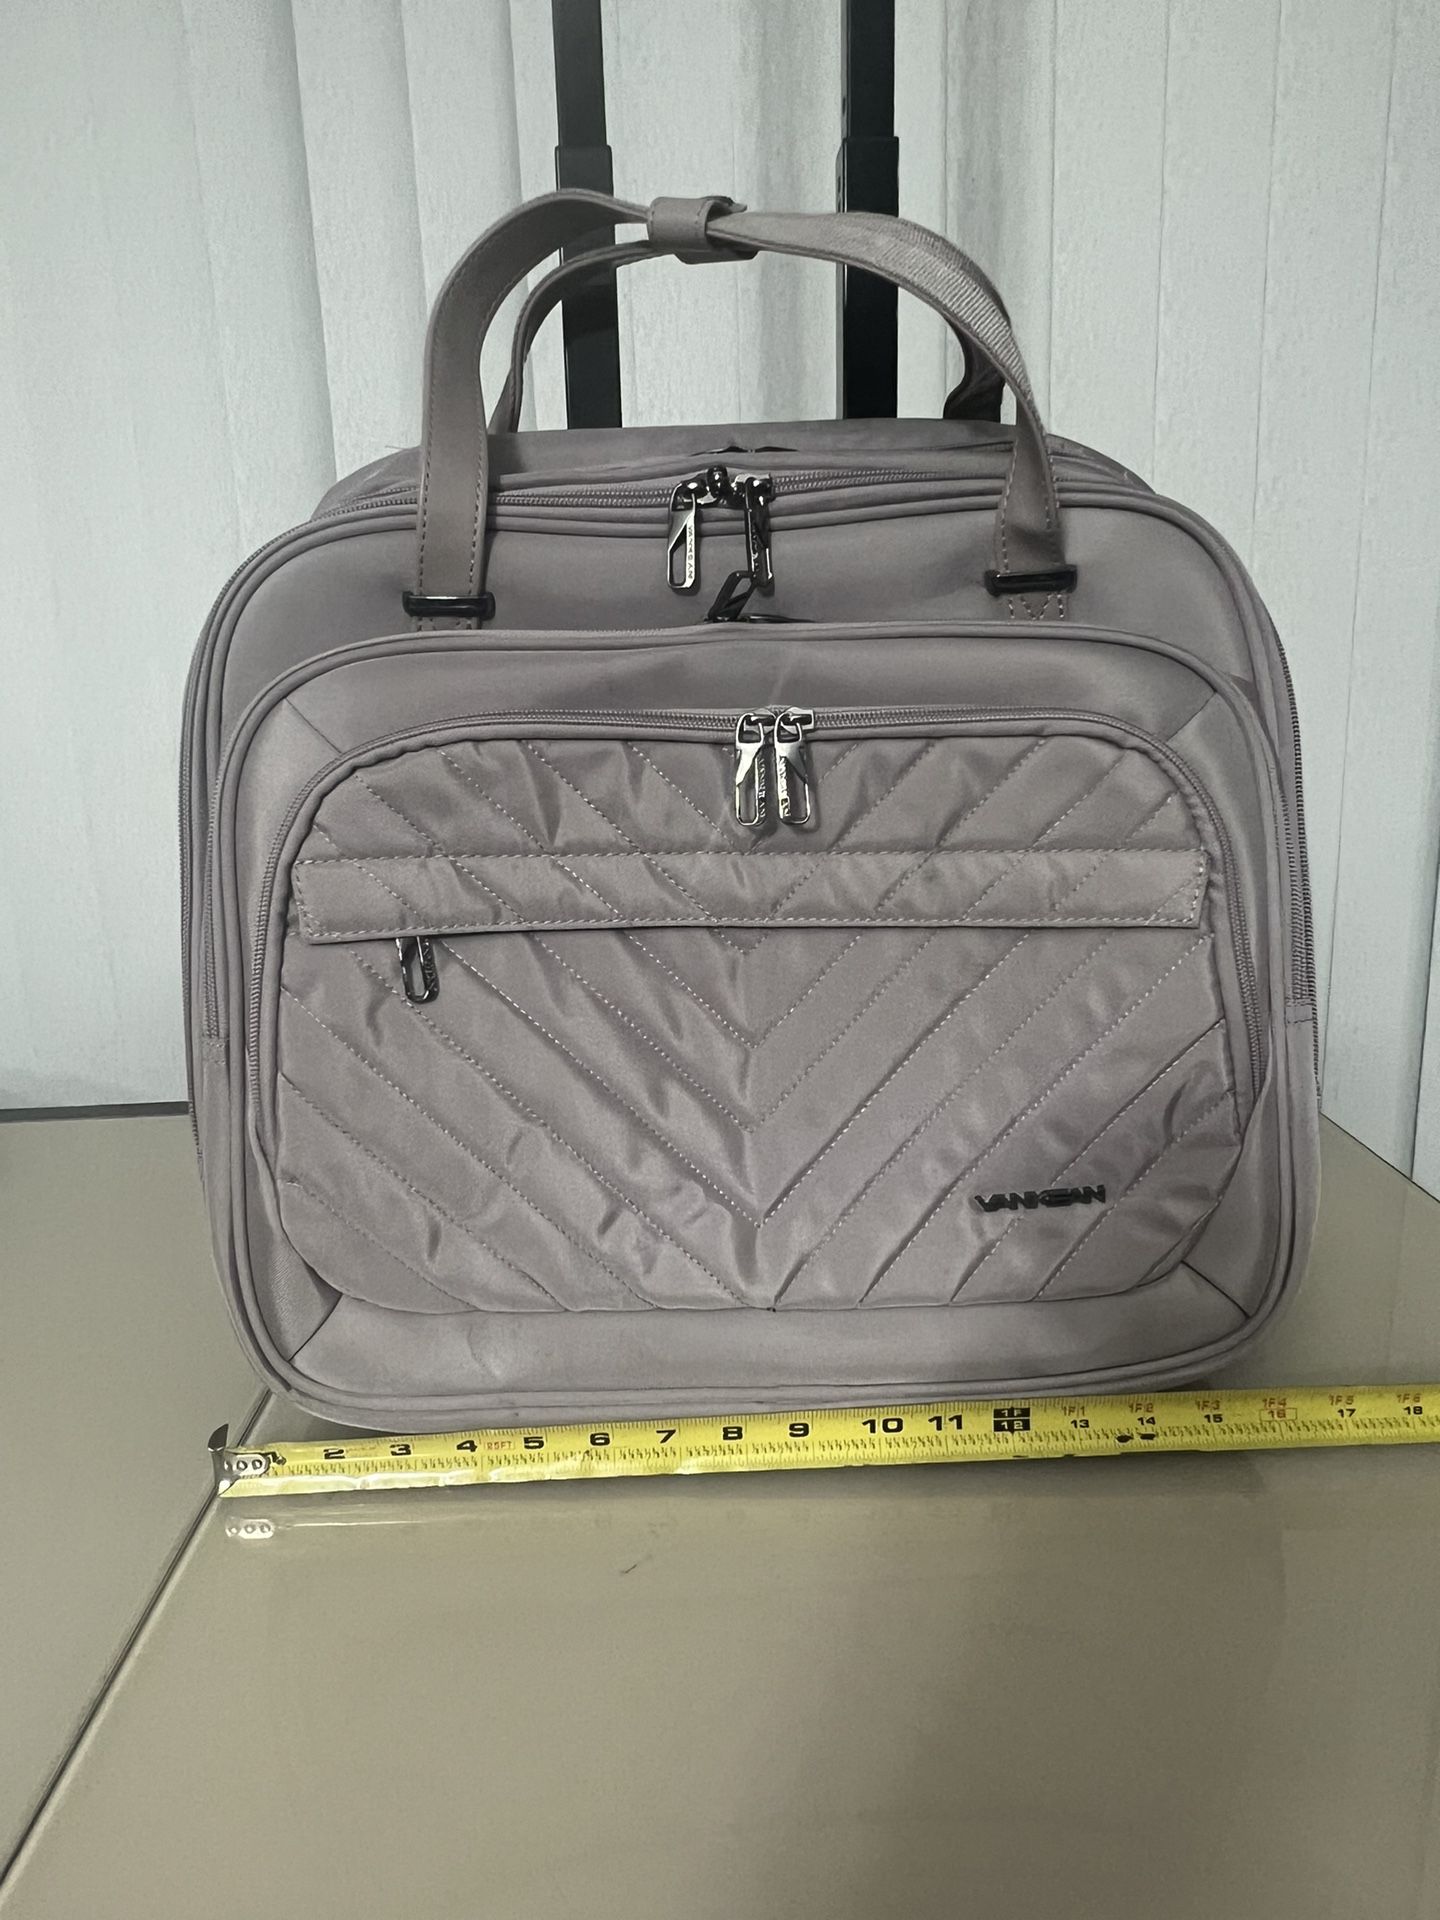 VANKEAN Rolling Laptop Bag Women with Wheels 15.6 Inch Rolling Briefcase Like new. Pre owned in excellent cosmetic condition with very very minimal si